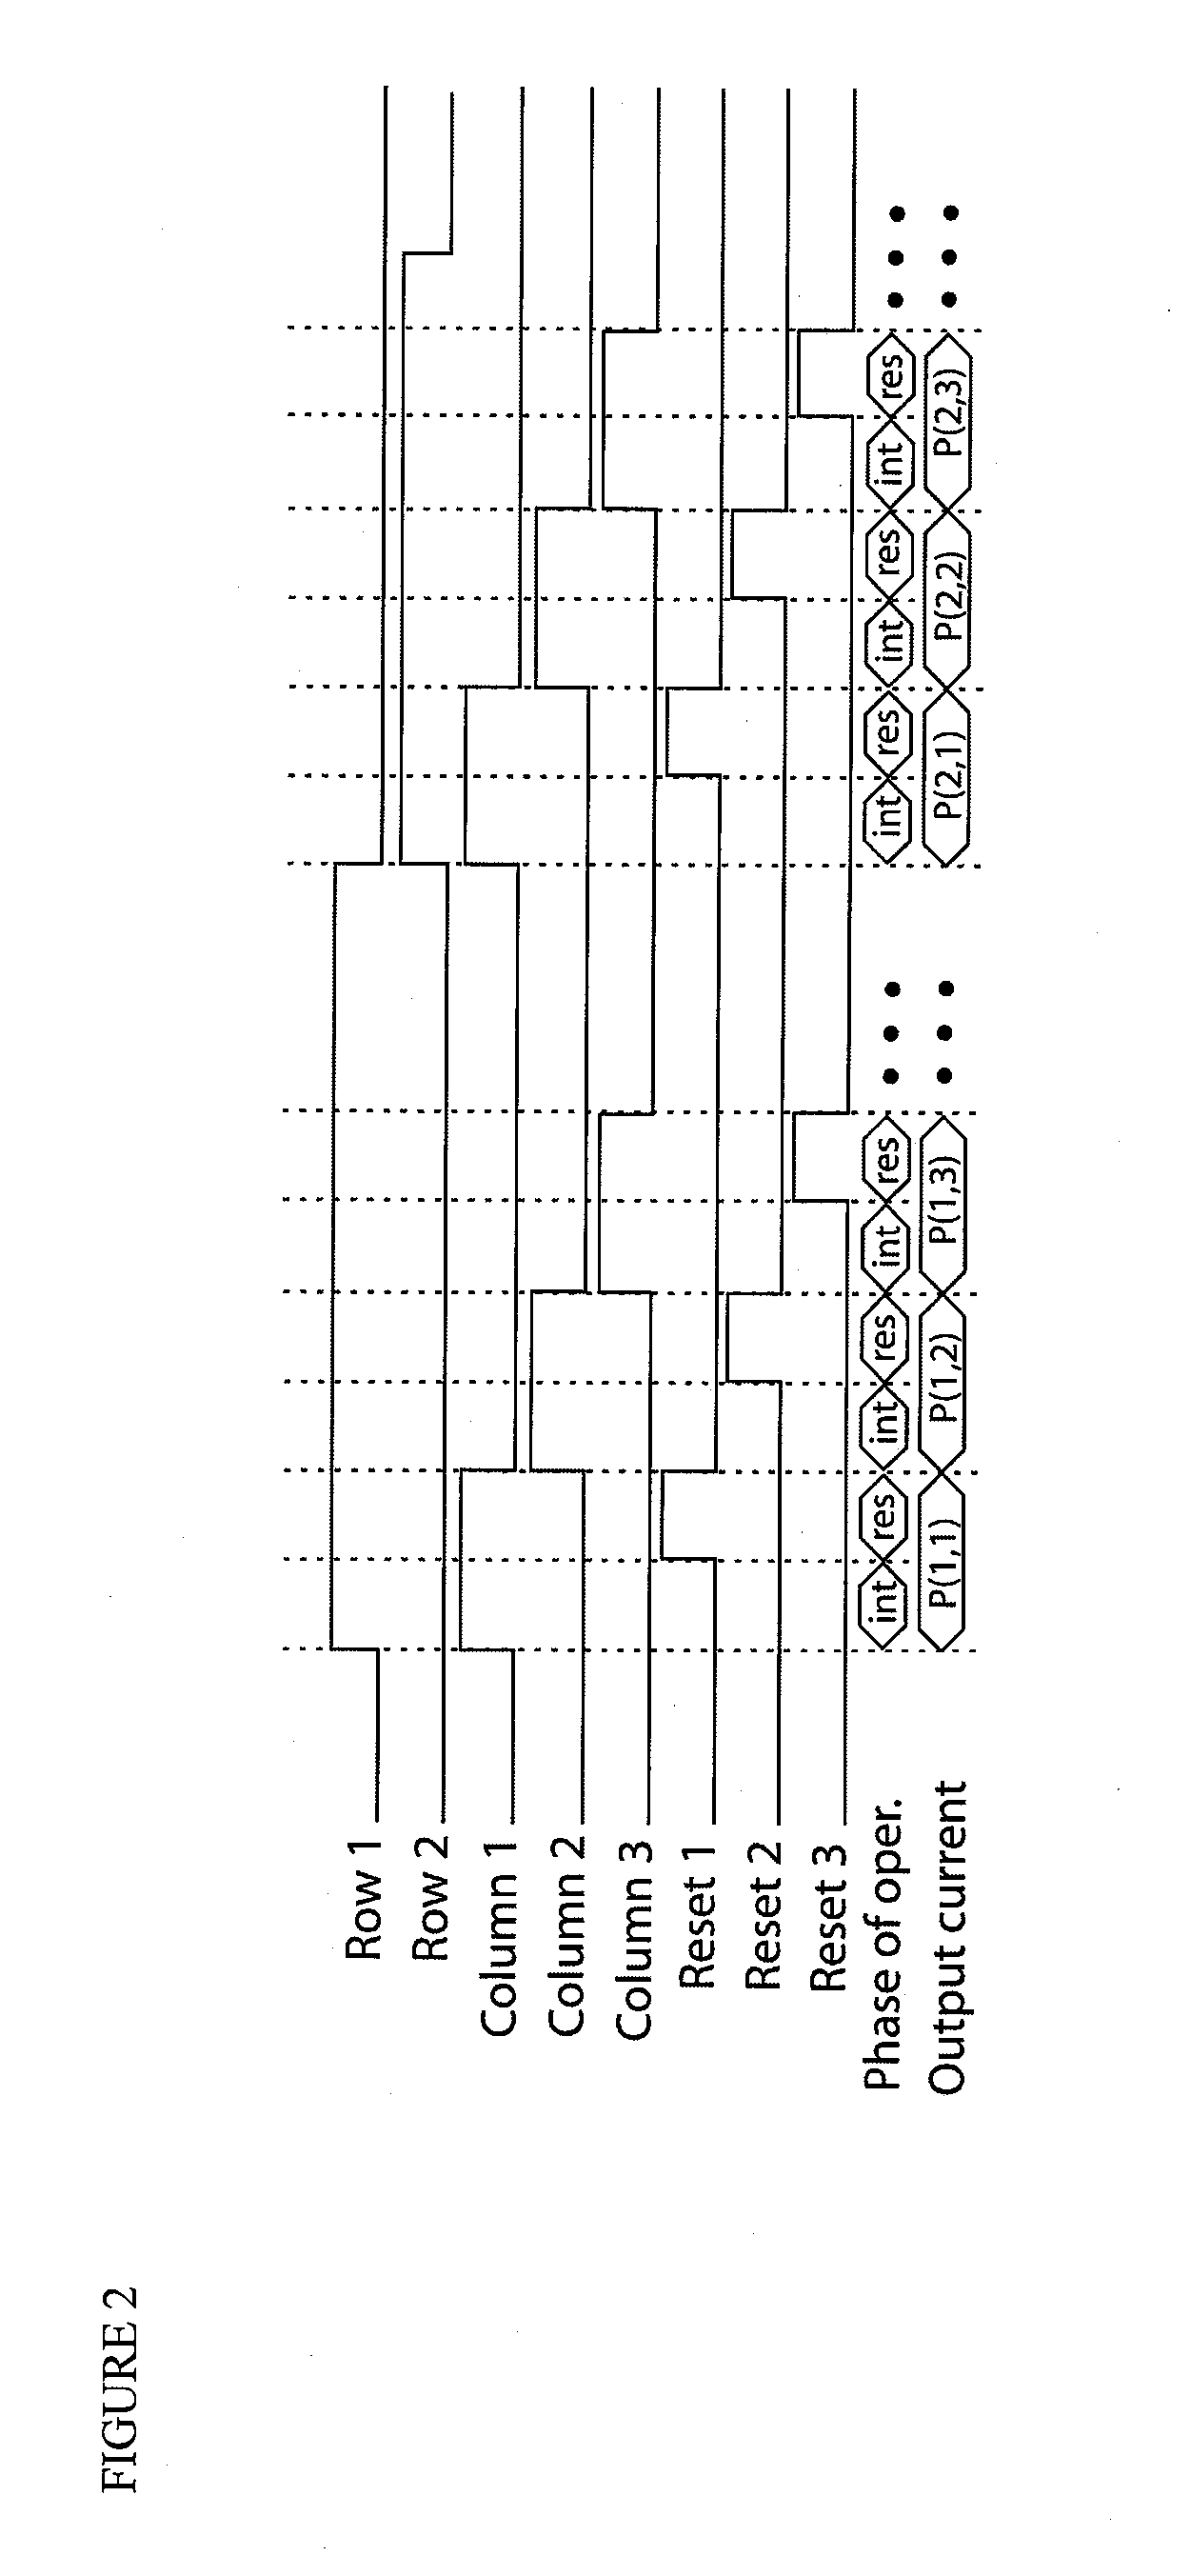 Current/voltage mode image sensor with switchless active pixels